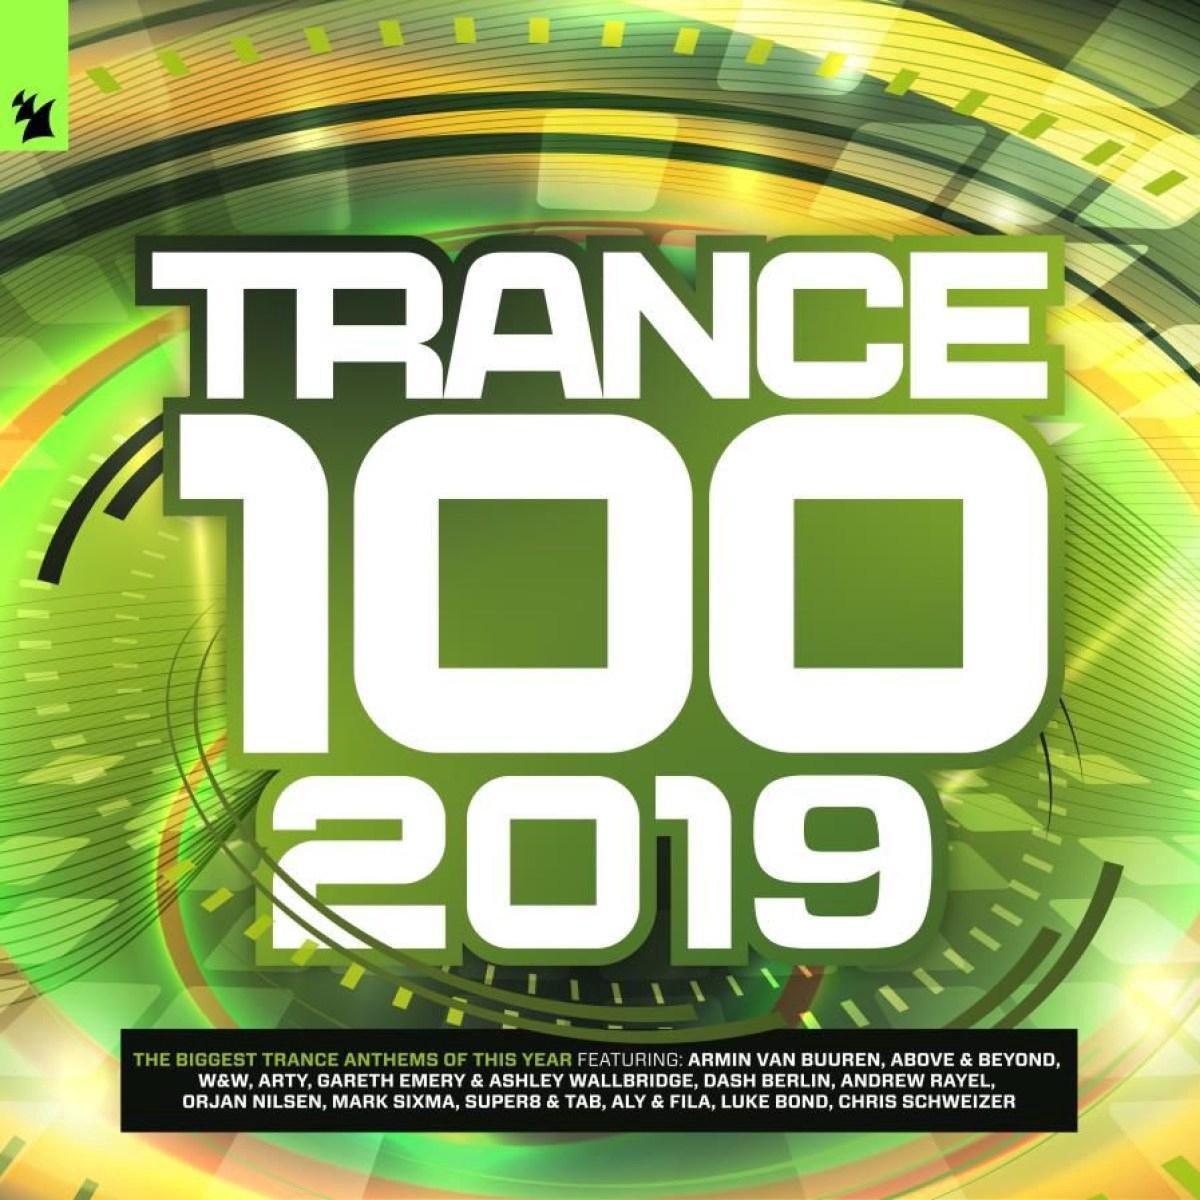 Trance 100 - 2019 - various artists